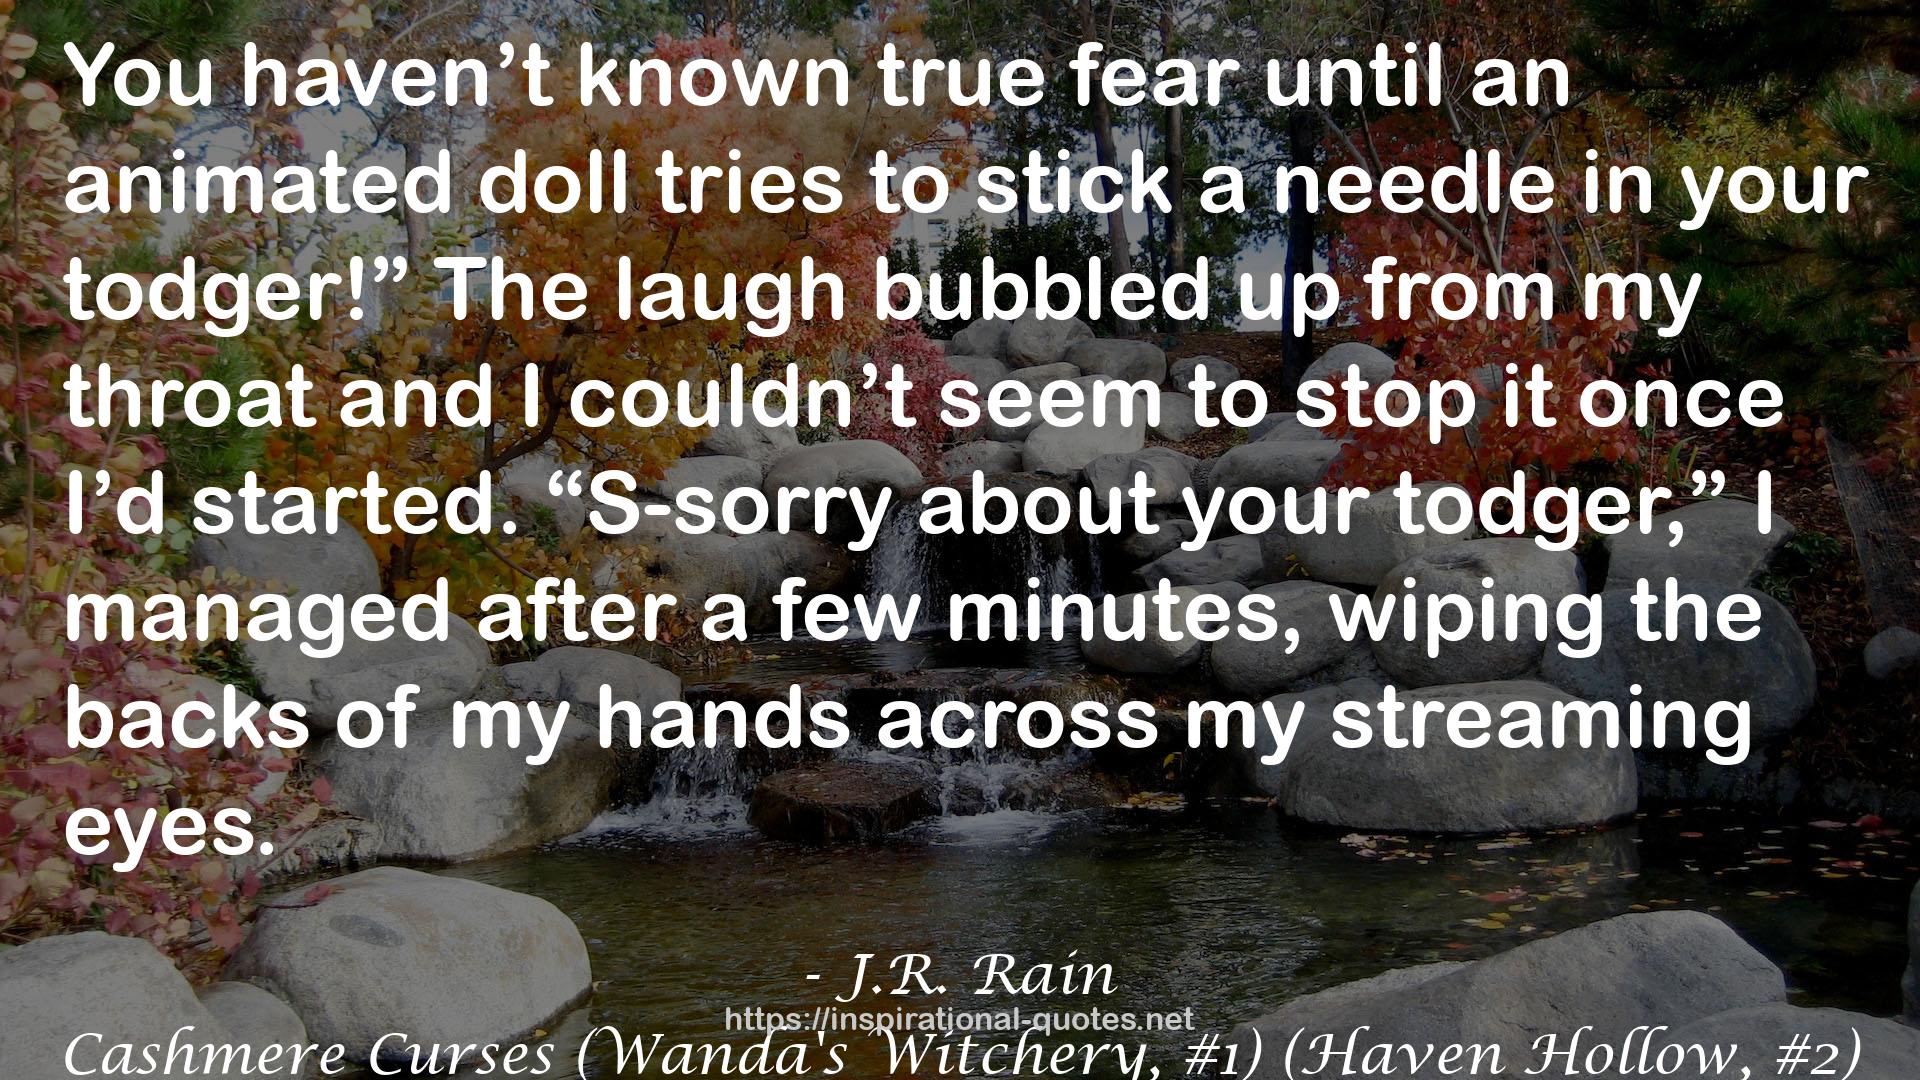 Cashmere Curses (Wanda's Witchery, #1) (Haven Hollow, #2) QUOTES